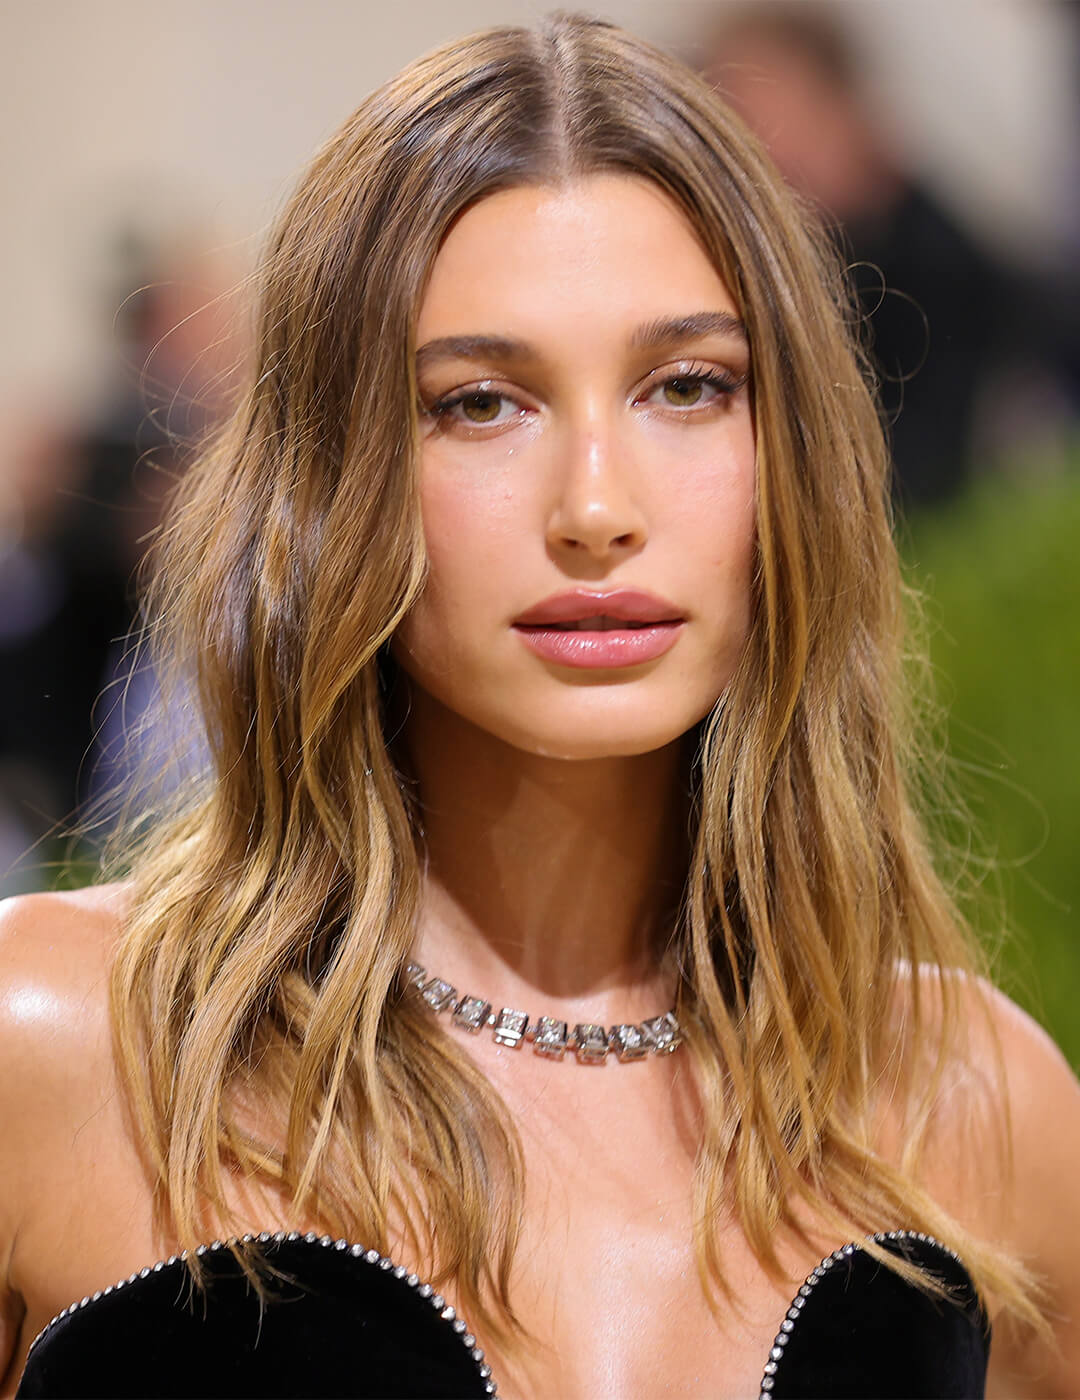 19 of the Biggest Hair Trends for 2022 According to Pro Stylists | IPSY